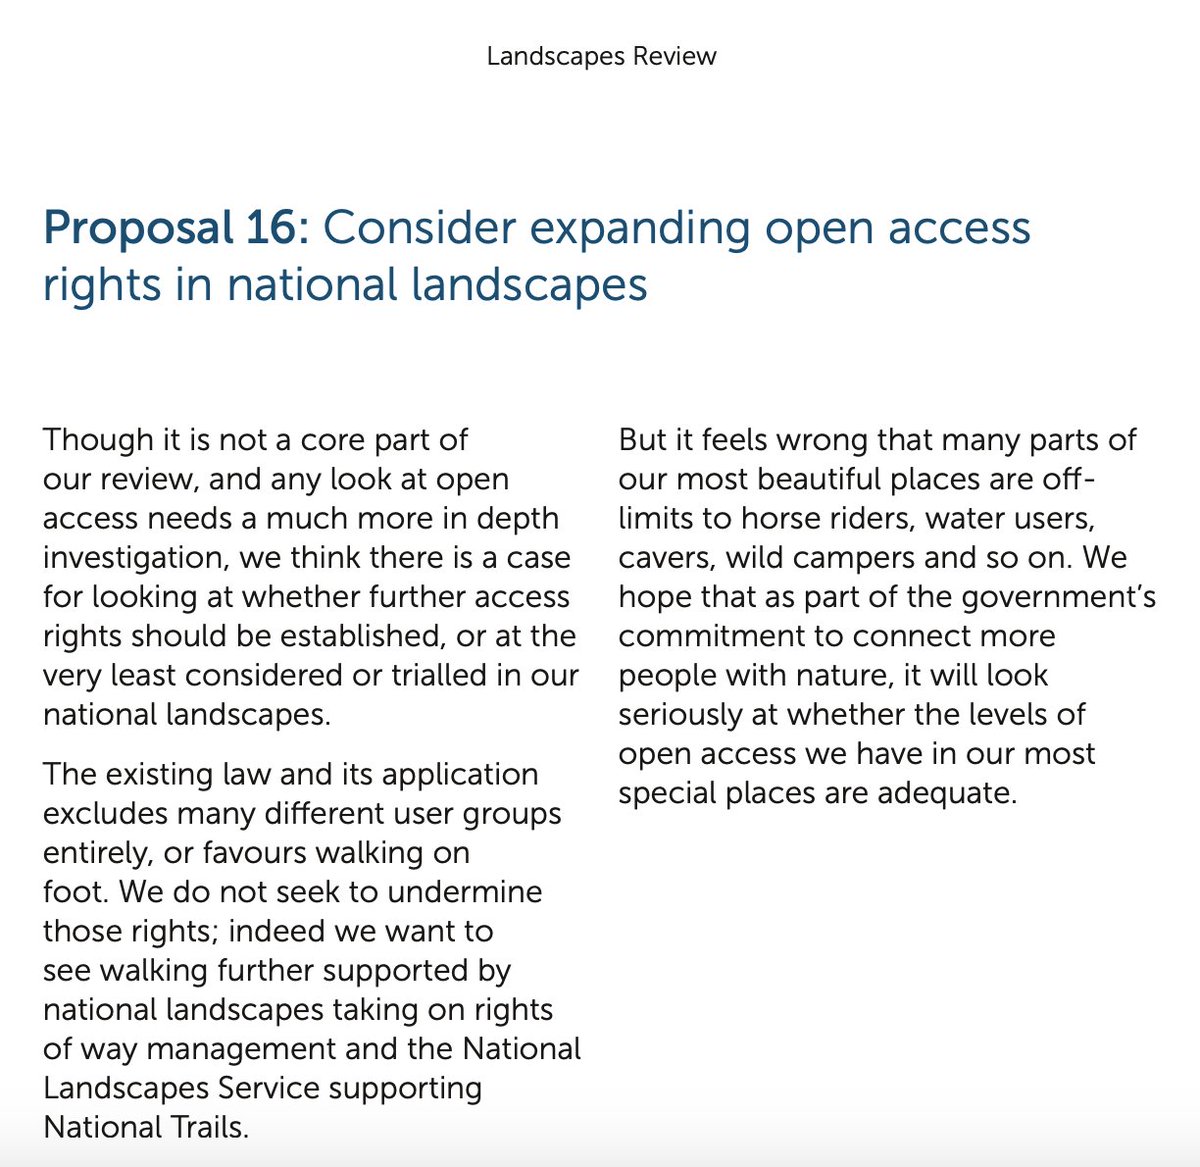 (3/8) Perhaps most interestingly, the letter mentions the 2019 Glover Review with its recommendation to “expanding open access rights in national landscapes”, ie National Parks & AONBs. The Govt *still* hasn’t responded to the Review. Will it adopt this recommendation?